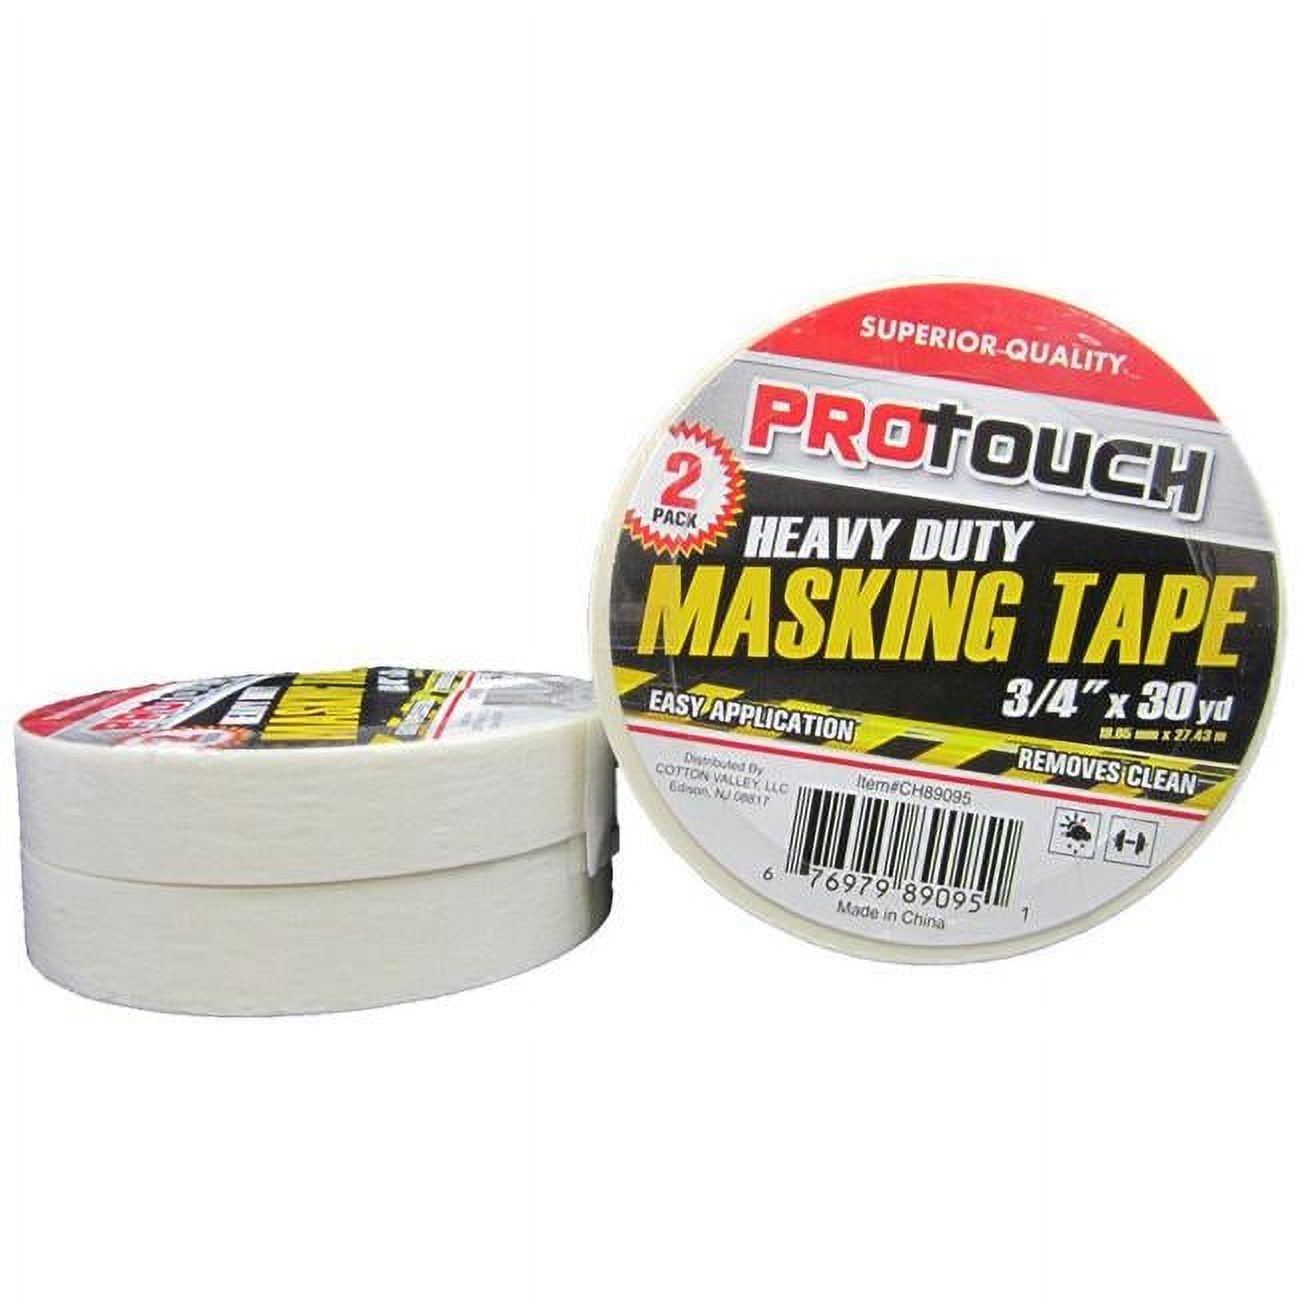 2316267 Pro Touch Heavy Duty Masking Tape, White - Case Of 48